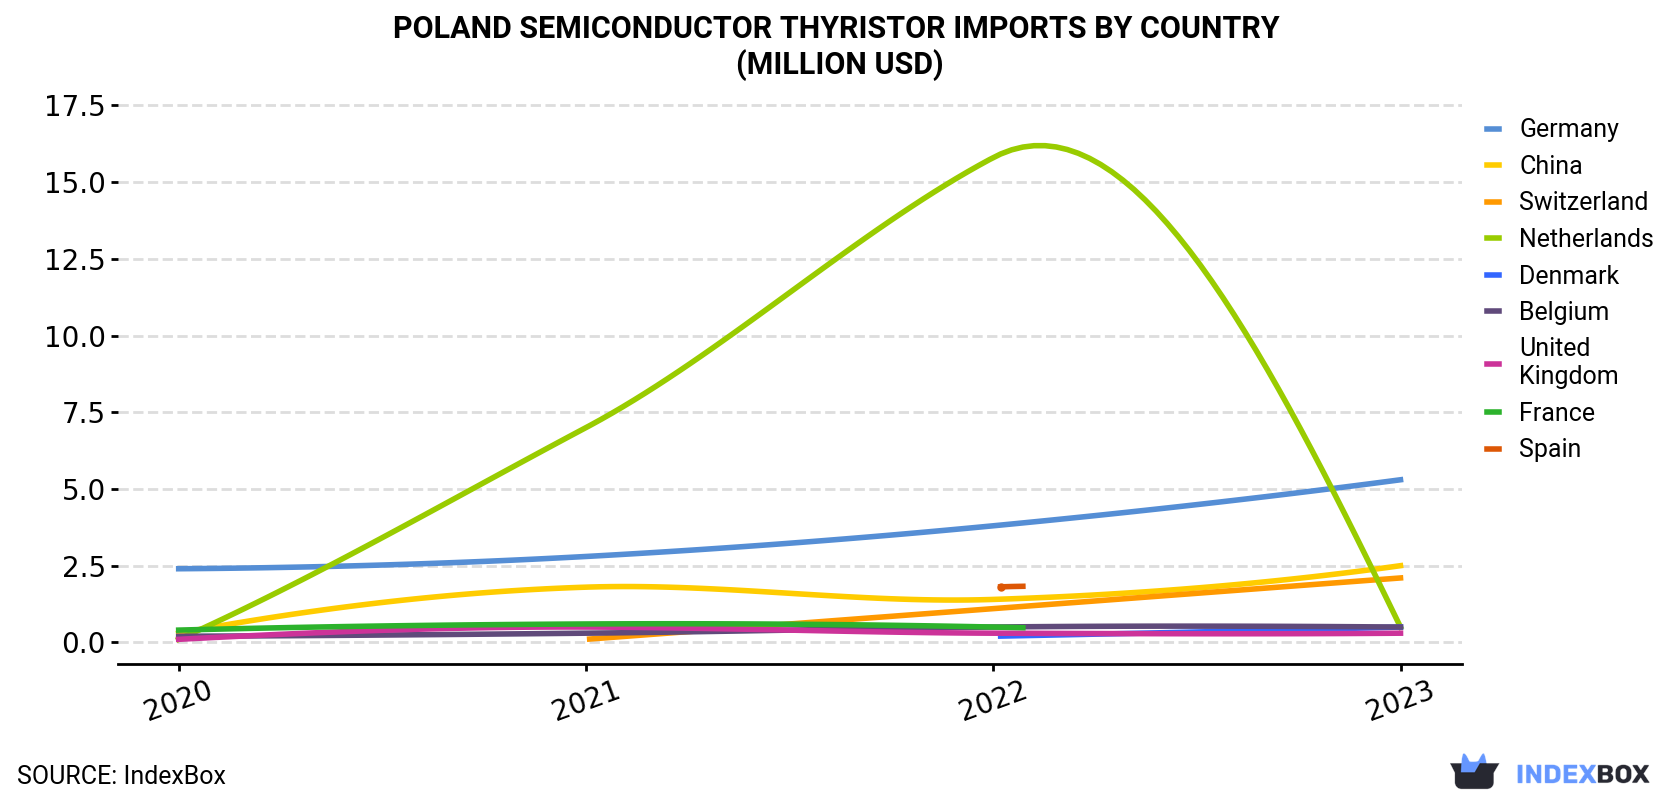 Poland Semiconductor Thyristor Imports By Country (Million USD)